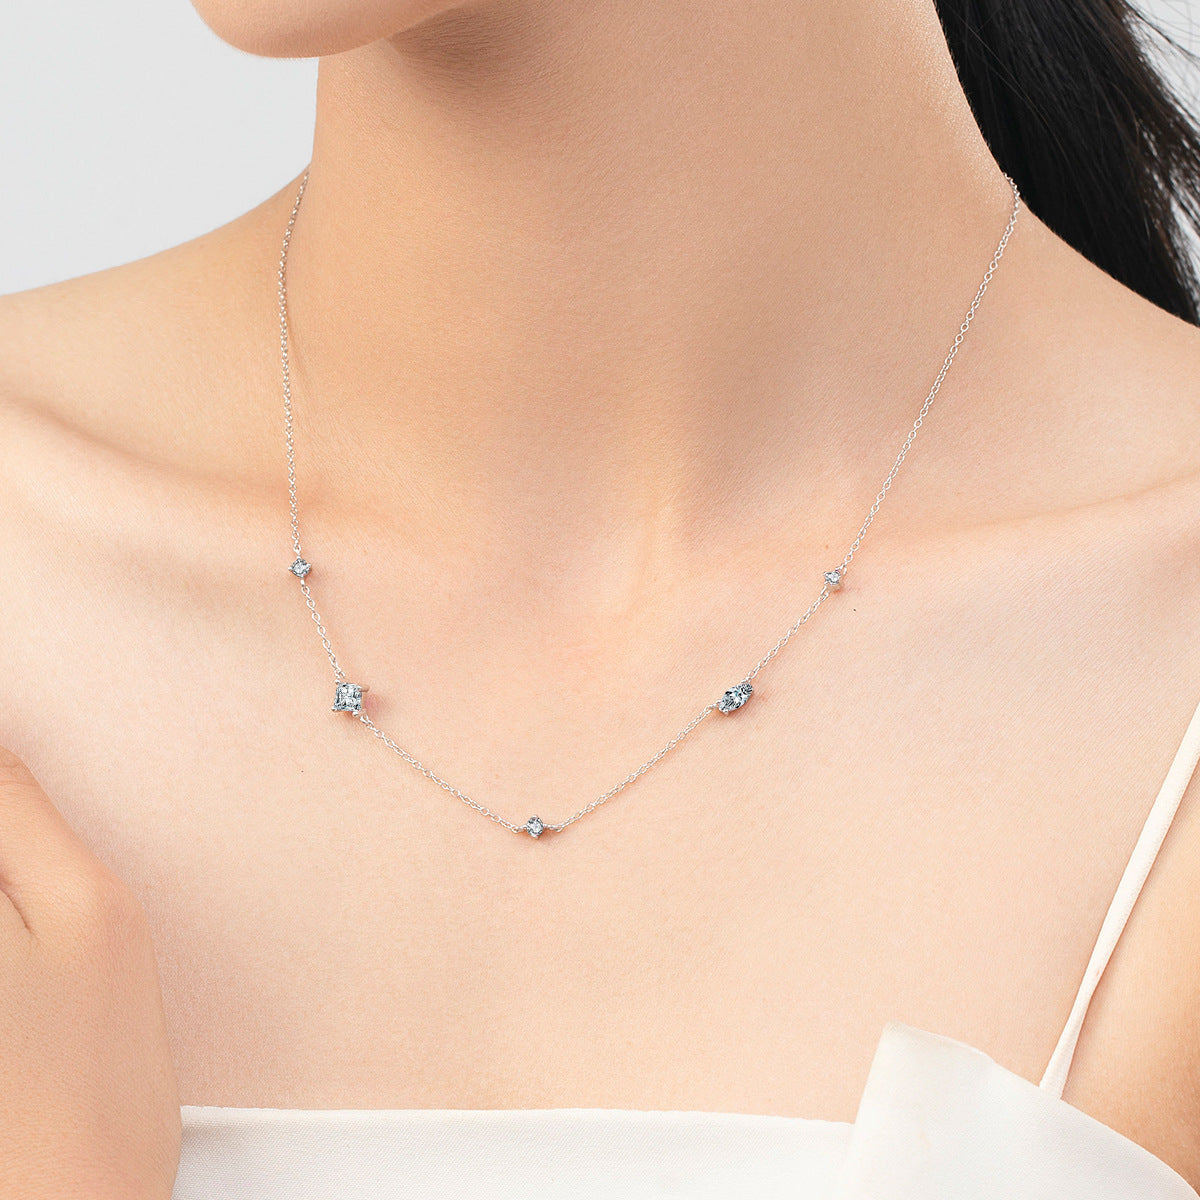 S925 Sterling Silver Summer Breeze Necklace with Zircon Accent